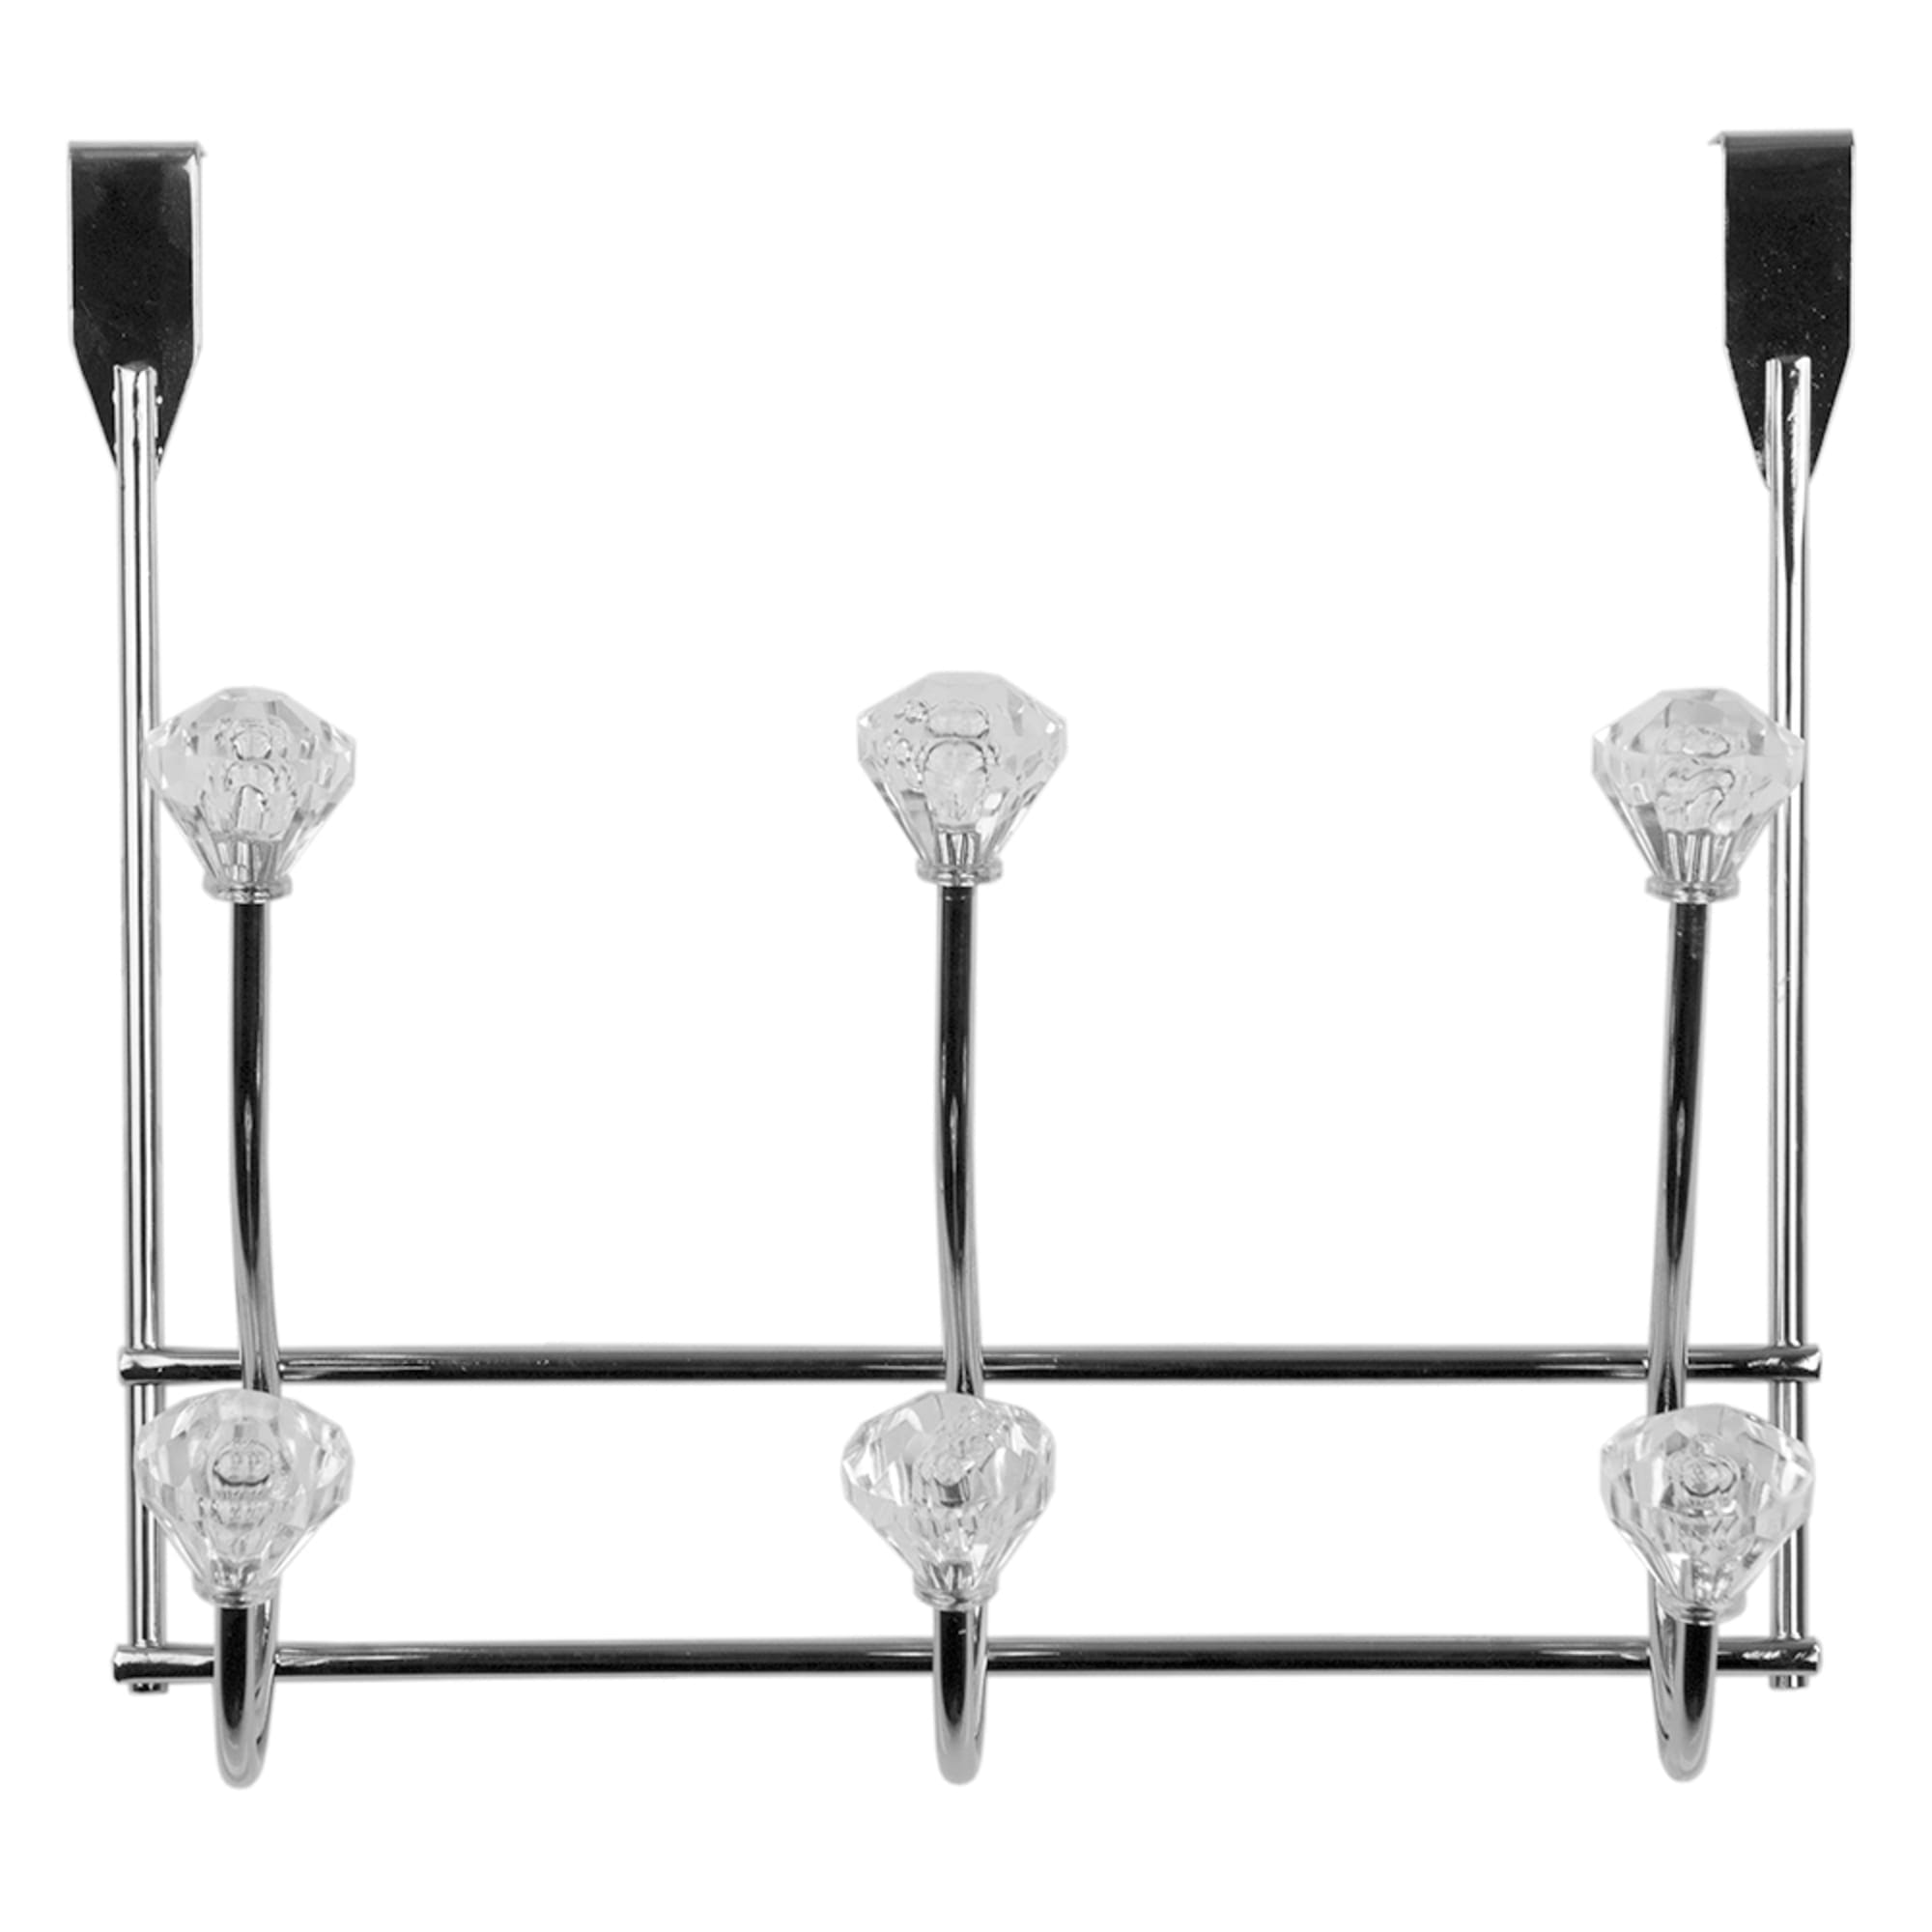 Home Basics Chrome Plated Steel 3 Hook Over the Door Hanging Rack, Crystals $5.00 EACH, CASE PACK OF 12